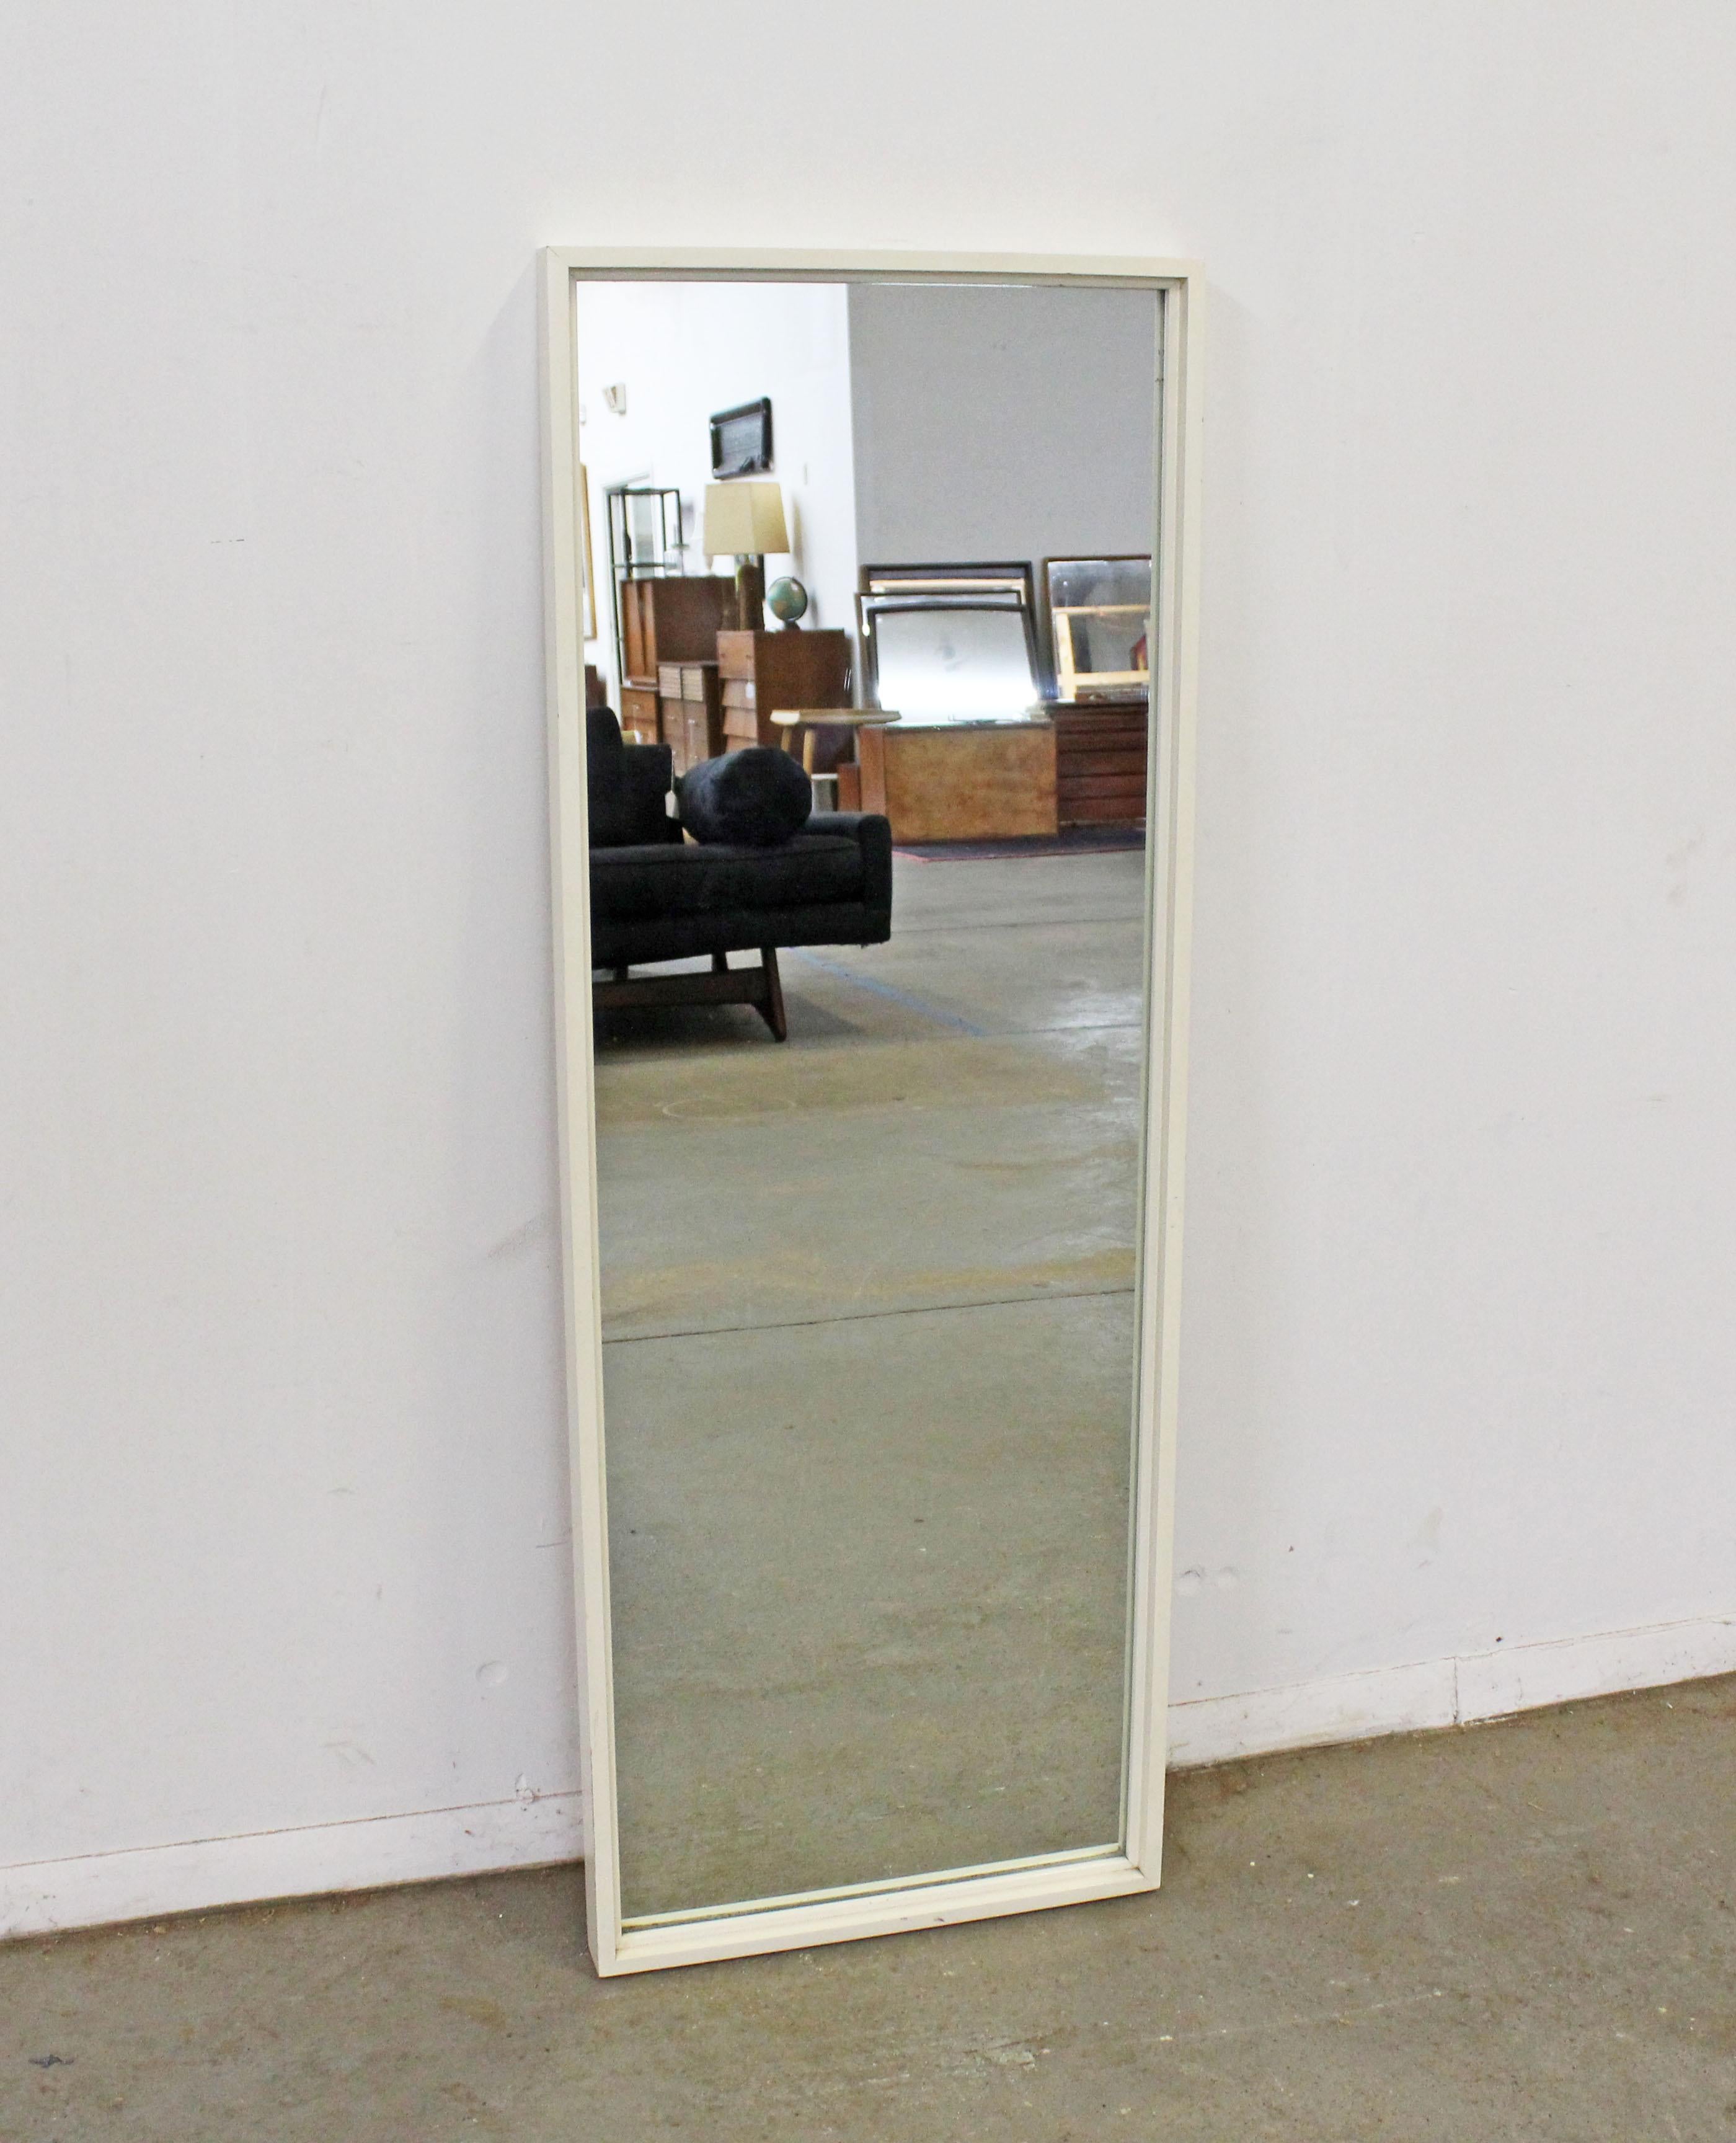 Offered is a vintage Mid-Century Modern mirror by Paul McCobb for Planner Group. This piece came with a matching and signed bedroom set. Has a hanger on the back. It was painted by the previous owner, but still in good condition with a few scratches